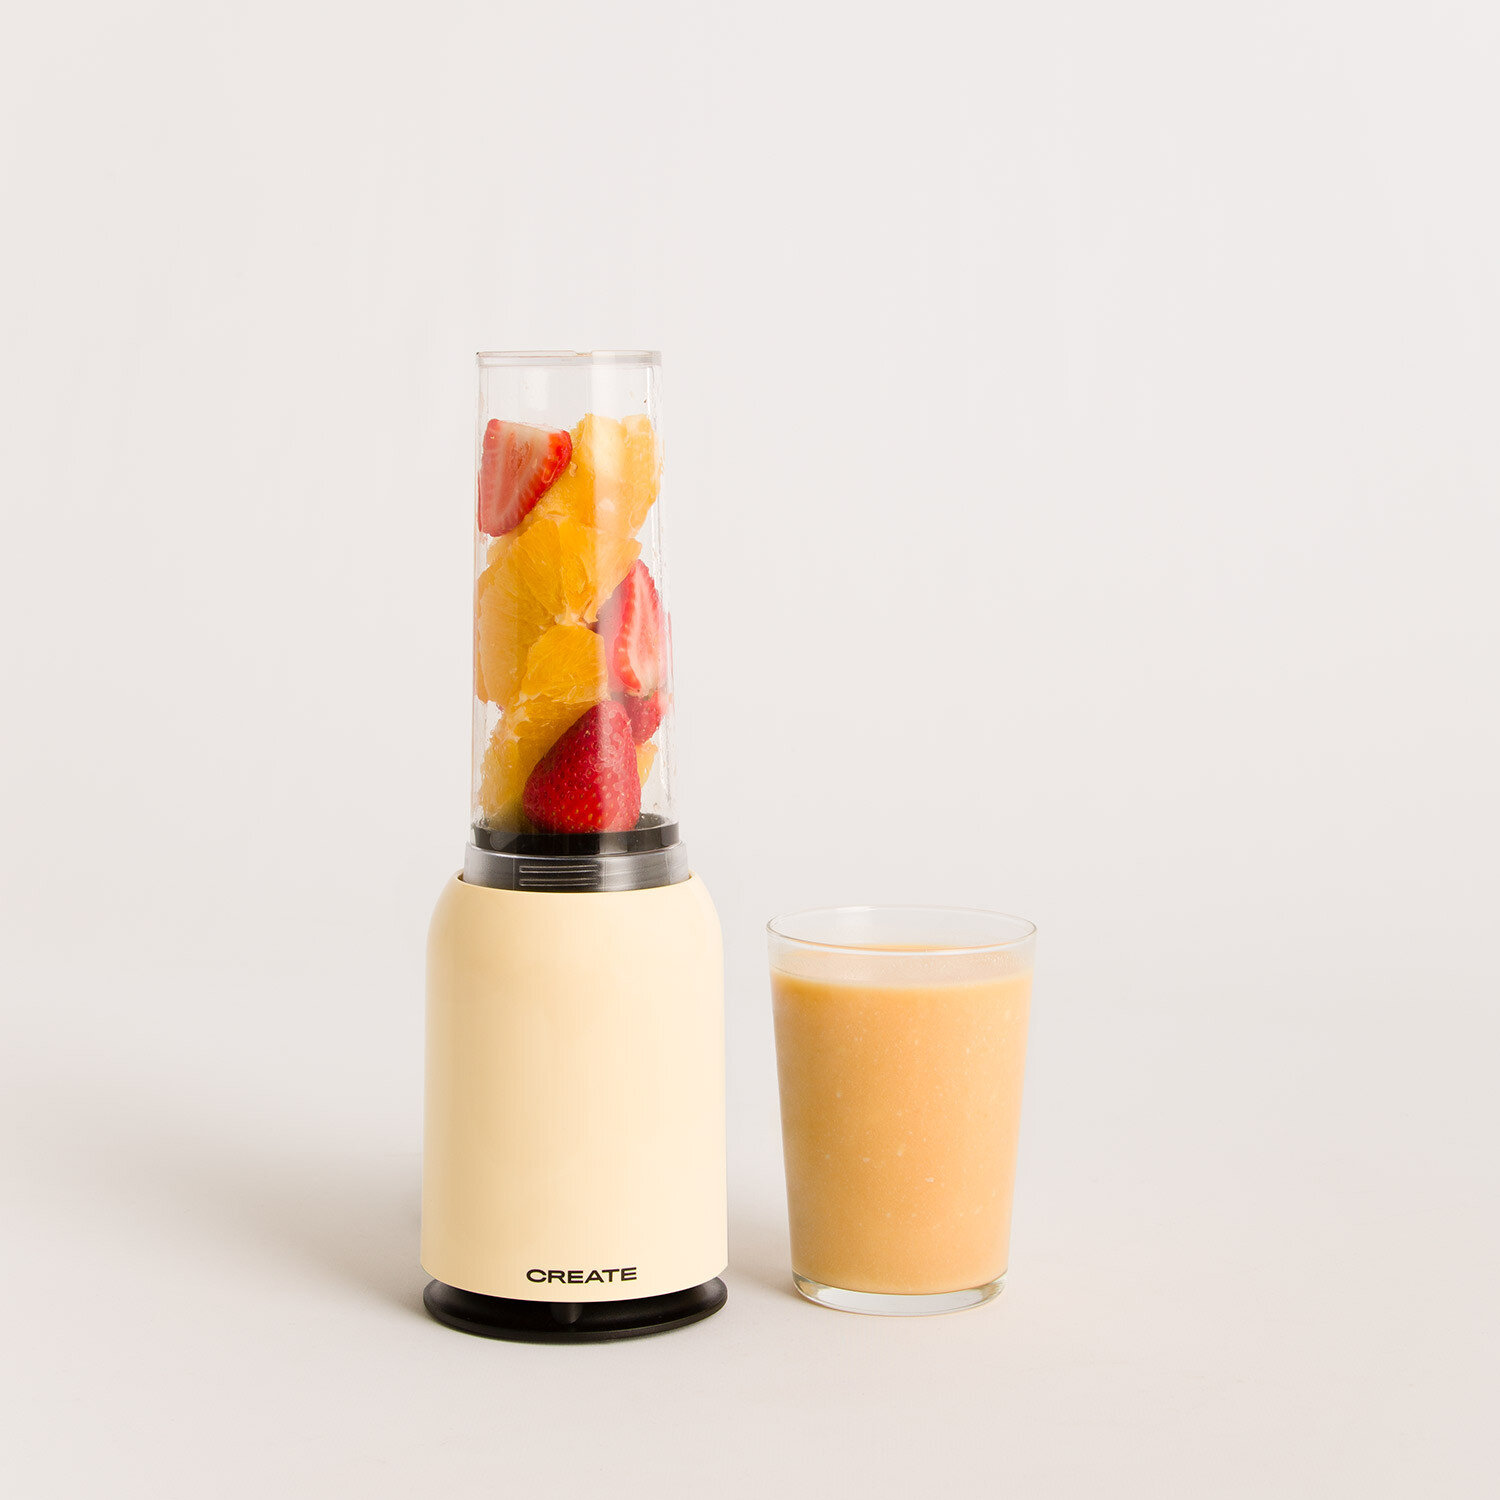 moi-slim-blender-with-portable-cup.jpg